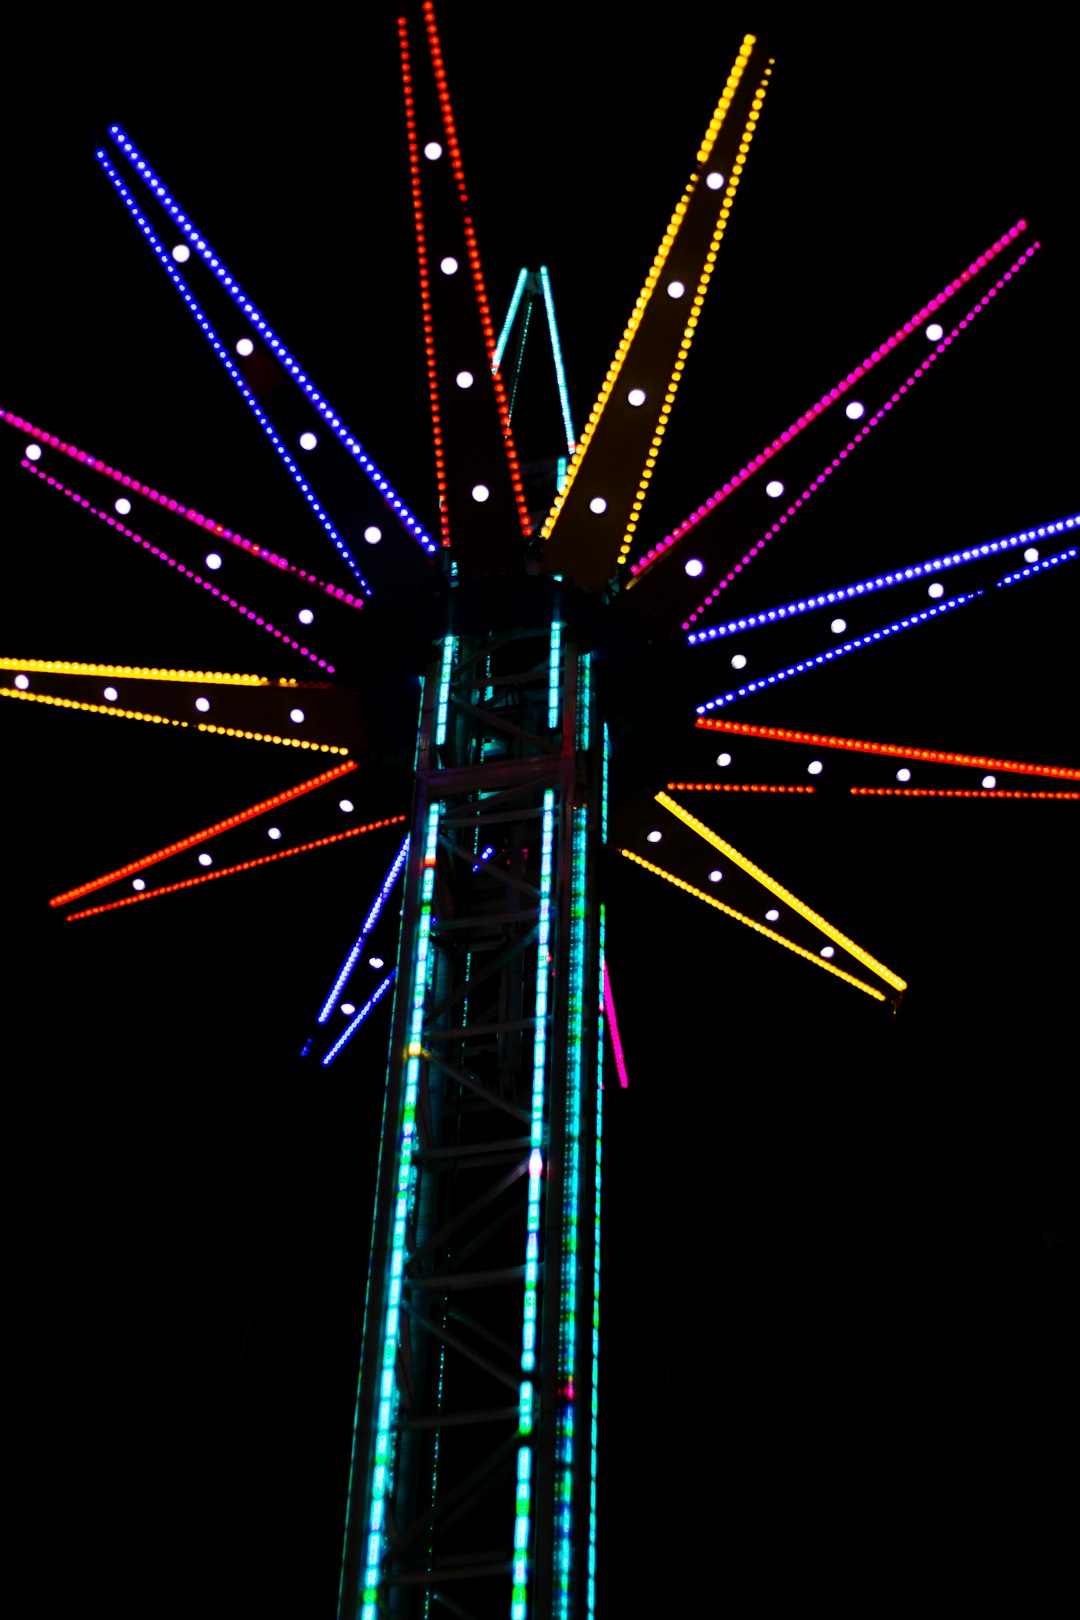 purple and blue ferris wheel during night time